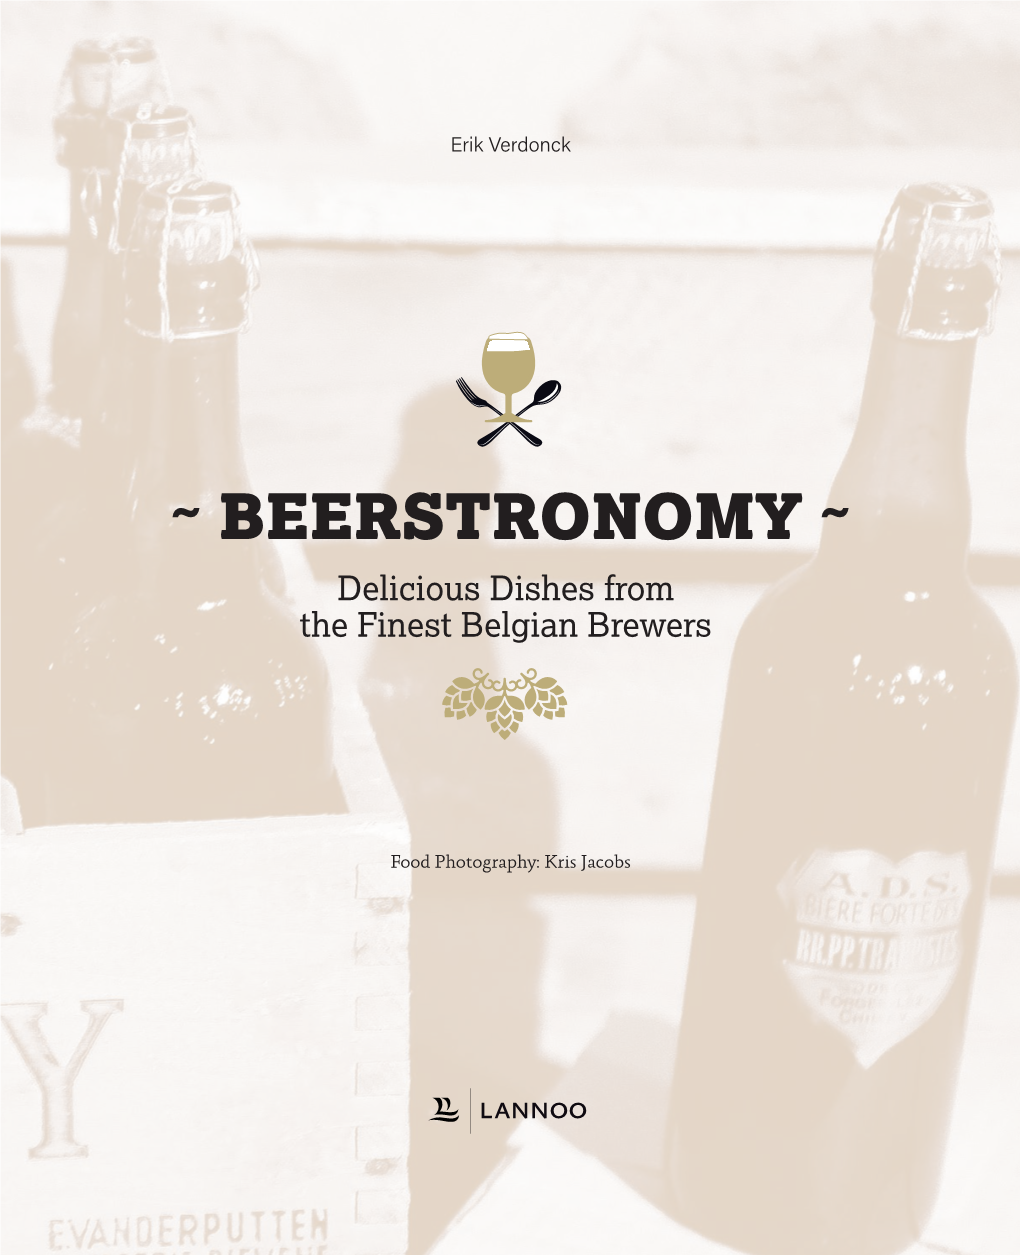 ˜ BEERSTRONOMY ˜ Delicious Dishes from the Finest Belgian Brewers